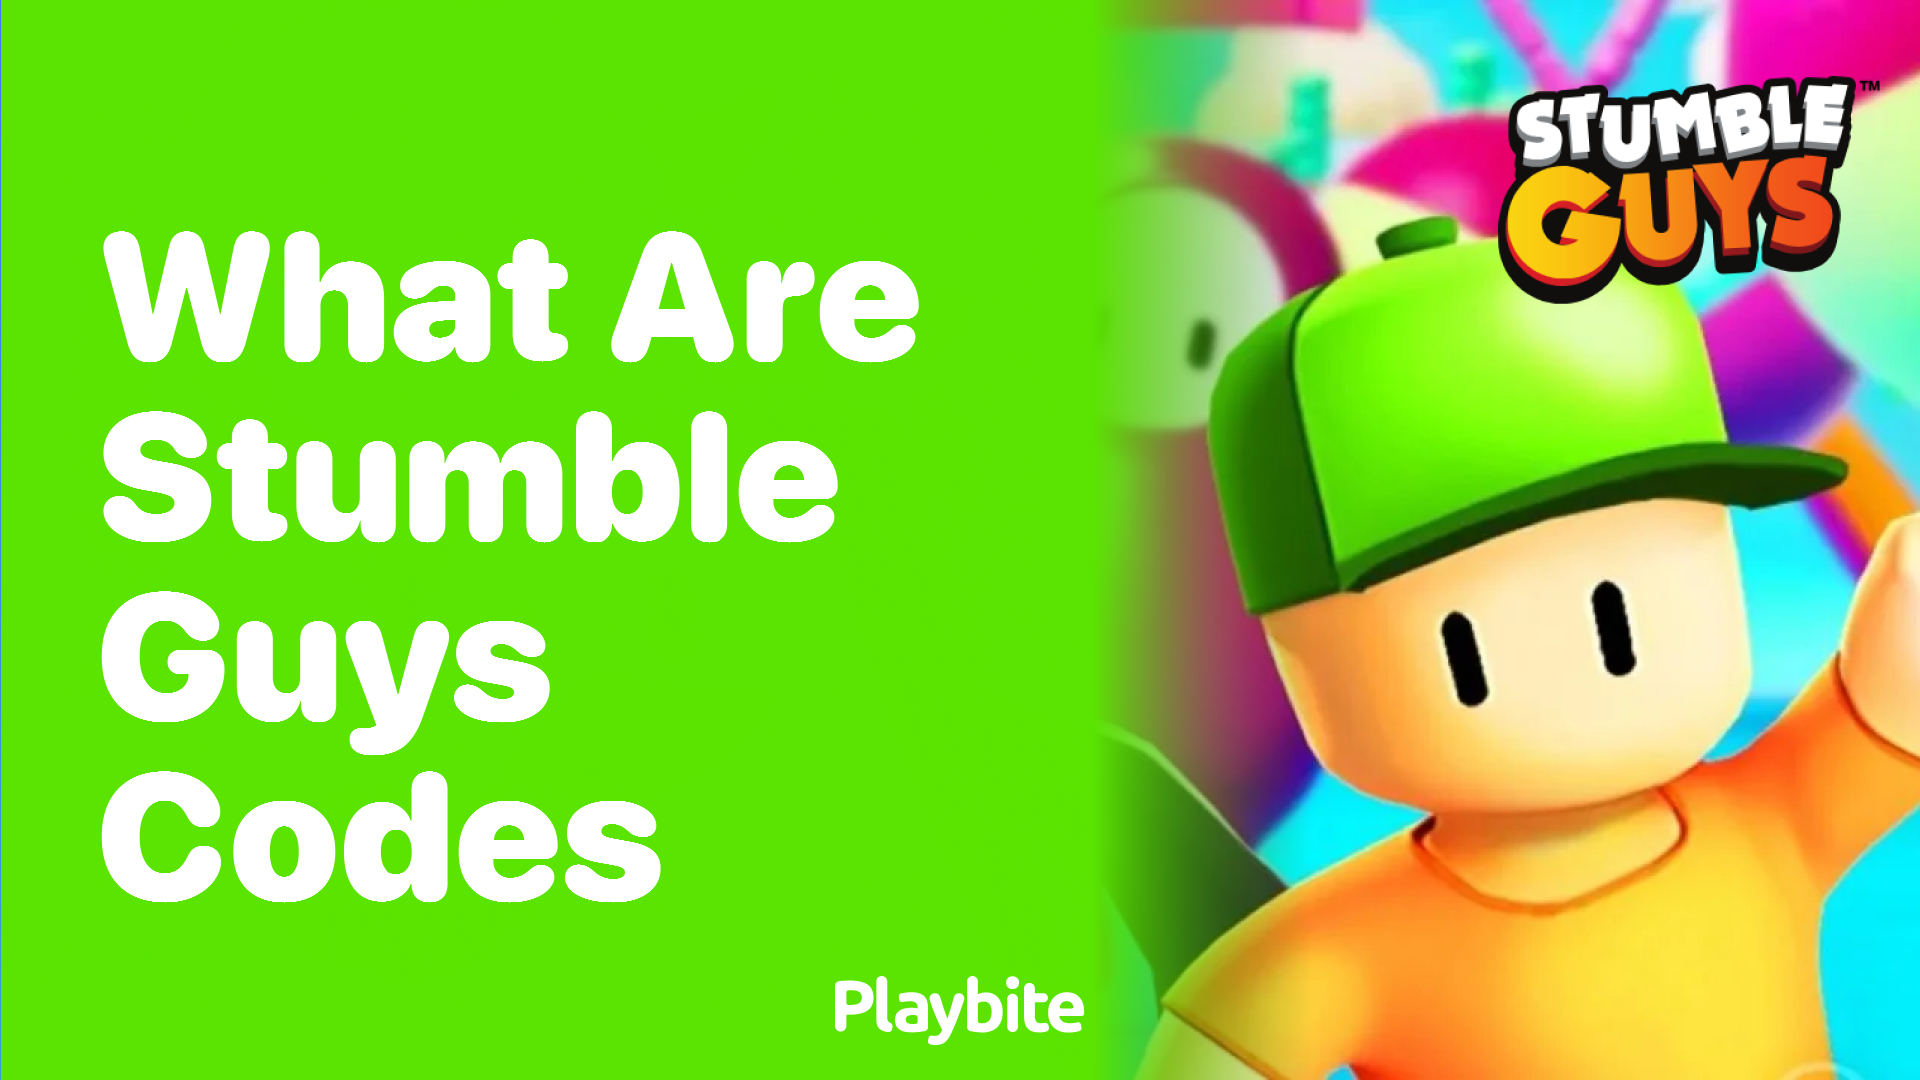 What Are Stumble Guys Codes?